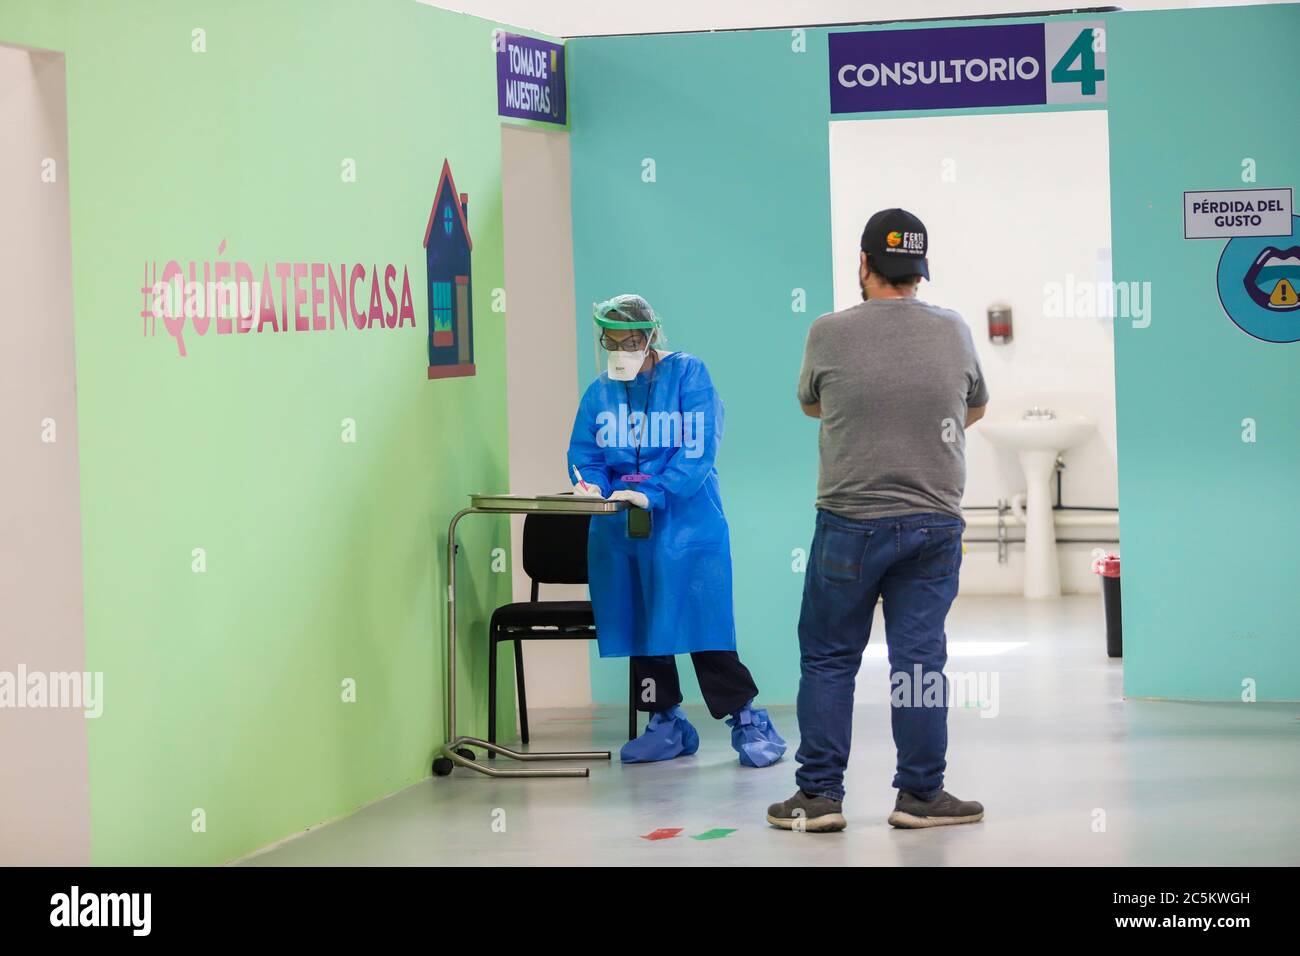 HERMOSILLO, MEXICO - JULY 3: Medical and health personnel carry out rapid tests and follow-up on people who present symptoms of covid-19 in the facilities of the Arena Sonora, which has led to the red alert due to the increase in cases in the state of Sonora on July 3, 2020 in Hermosillo, Mexico. (Luis Gutierrez / Norte Photo /)   HERMOSILLO, MEXICO - JULY 3: Medical and health personnel carry out rapid tests and follow-up on people who present symptoms of covid-19 in the facilities of the Arena Sonora, which has led to the red alert due to the increase in cases in the state of Sonora on July Stock Photo